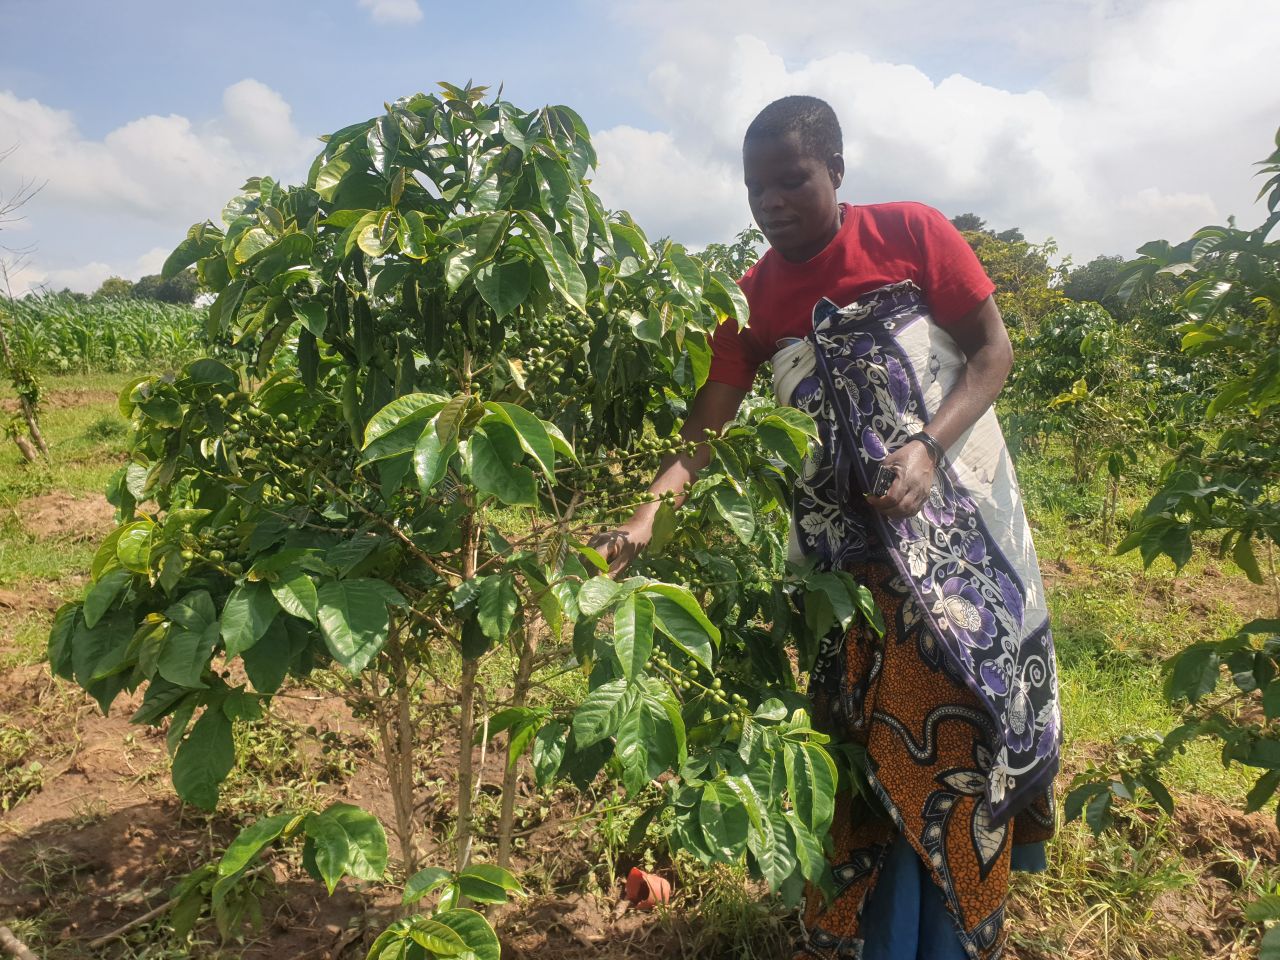 Tanzania’s Coffee Sector Faces Severe Effects of Climate Change.